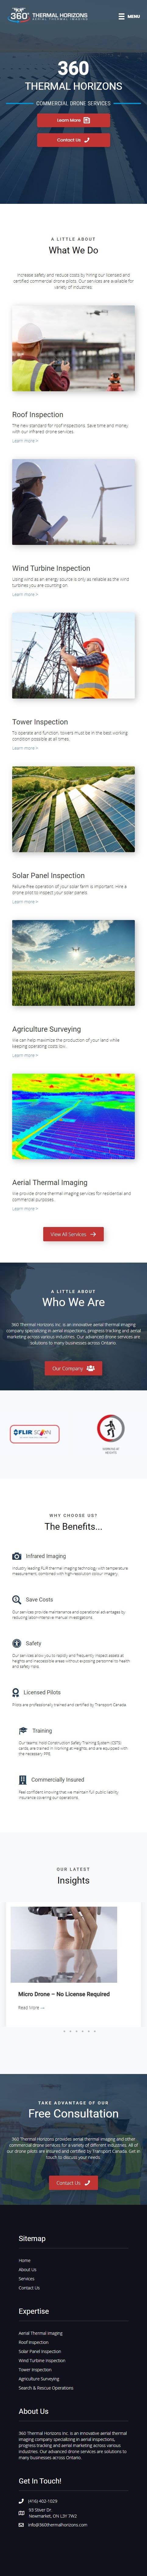 mobile version of web design project for commercial drone company in Newmarket